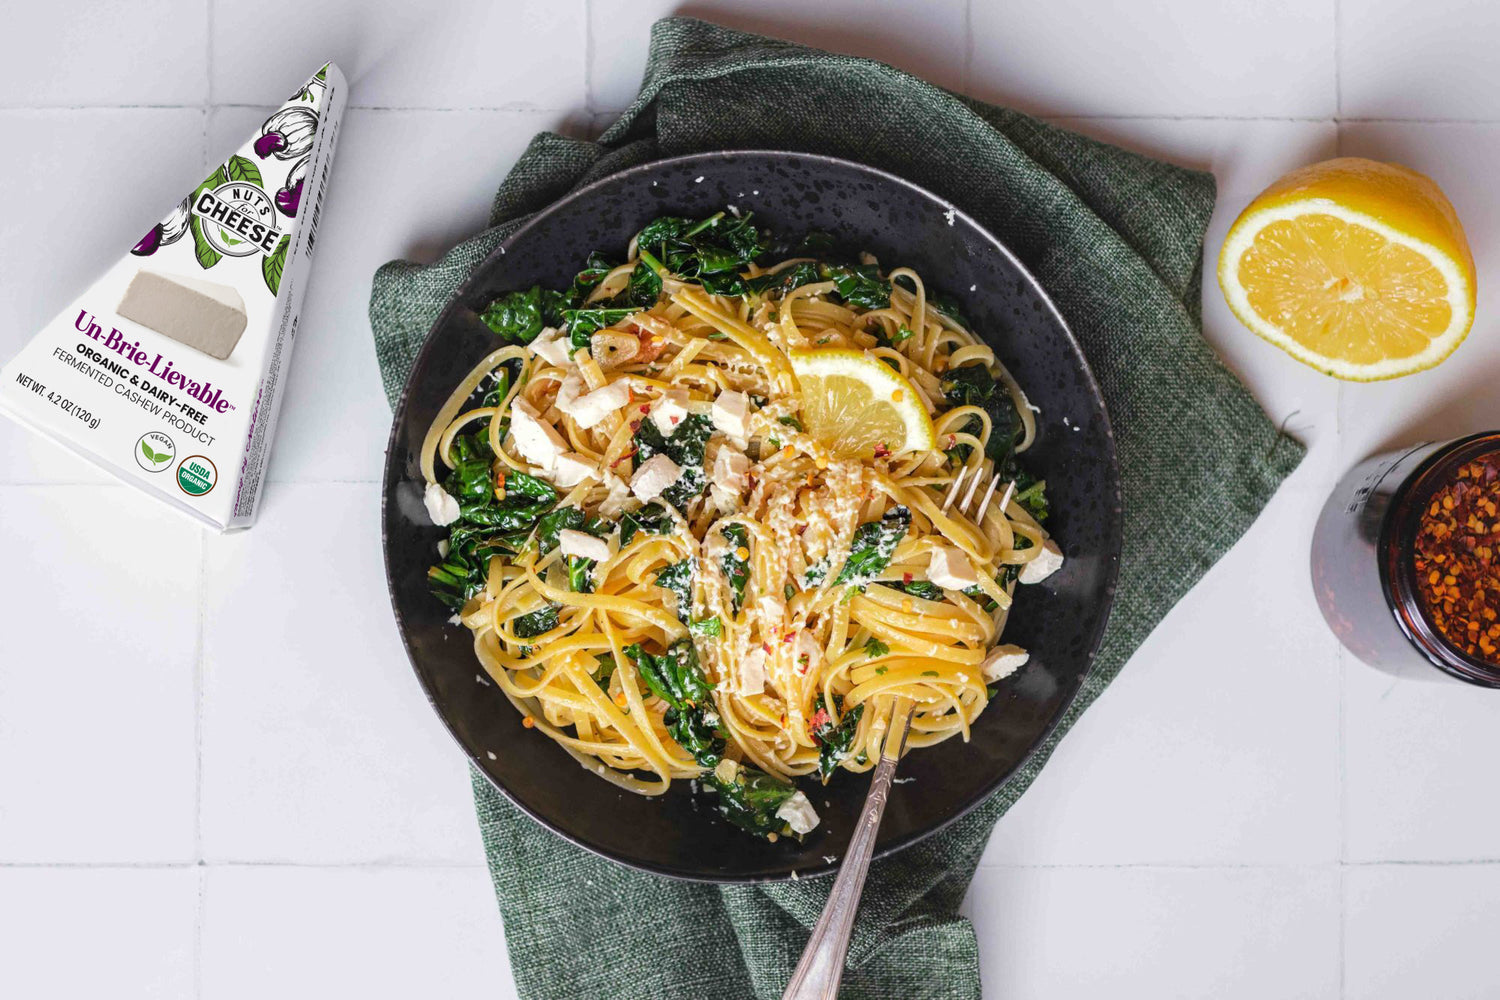 A pan full of prepared linguine with kale, set beside a box of dairy free brie cheese, a sliced lemon, and chili flakes.